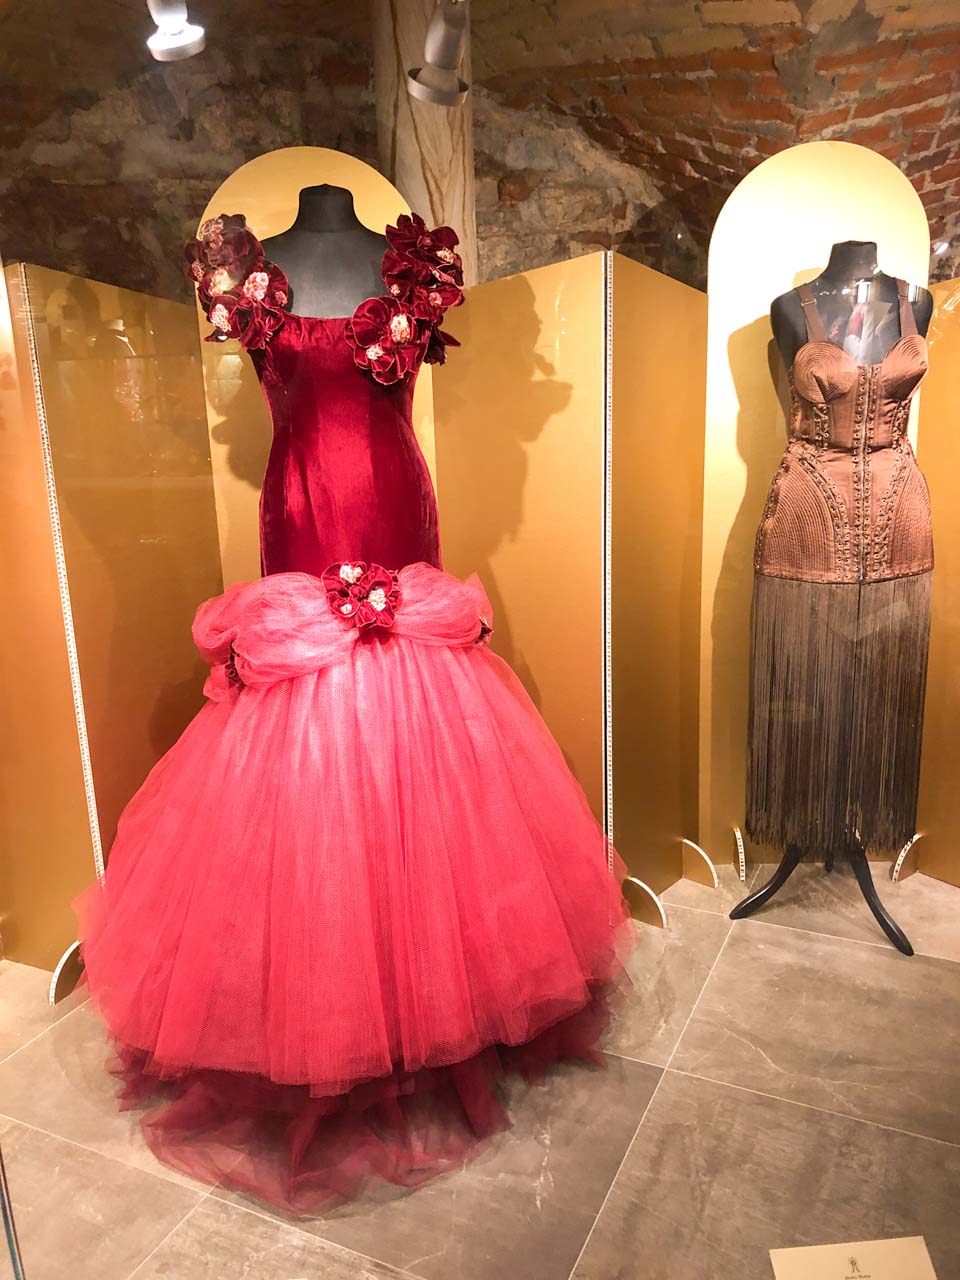 A red gown with faux flowers and a brown corset dress with tassels on display at the Fashion Museum in Riga